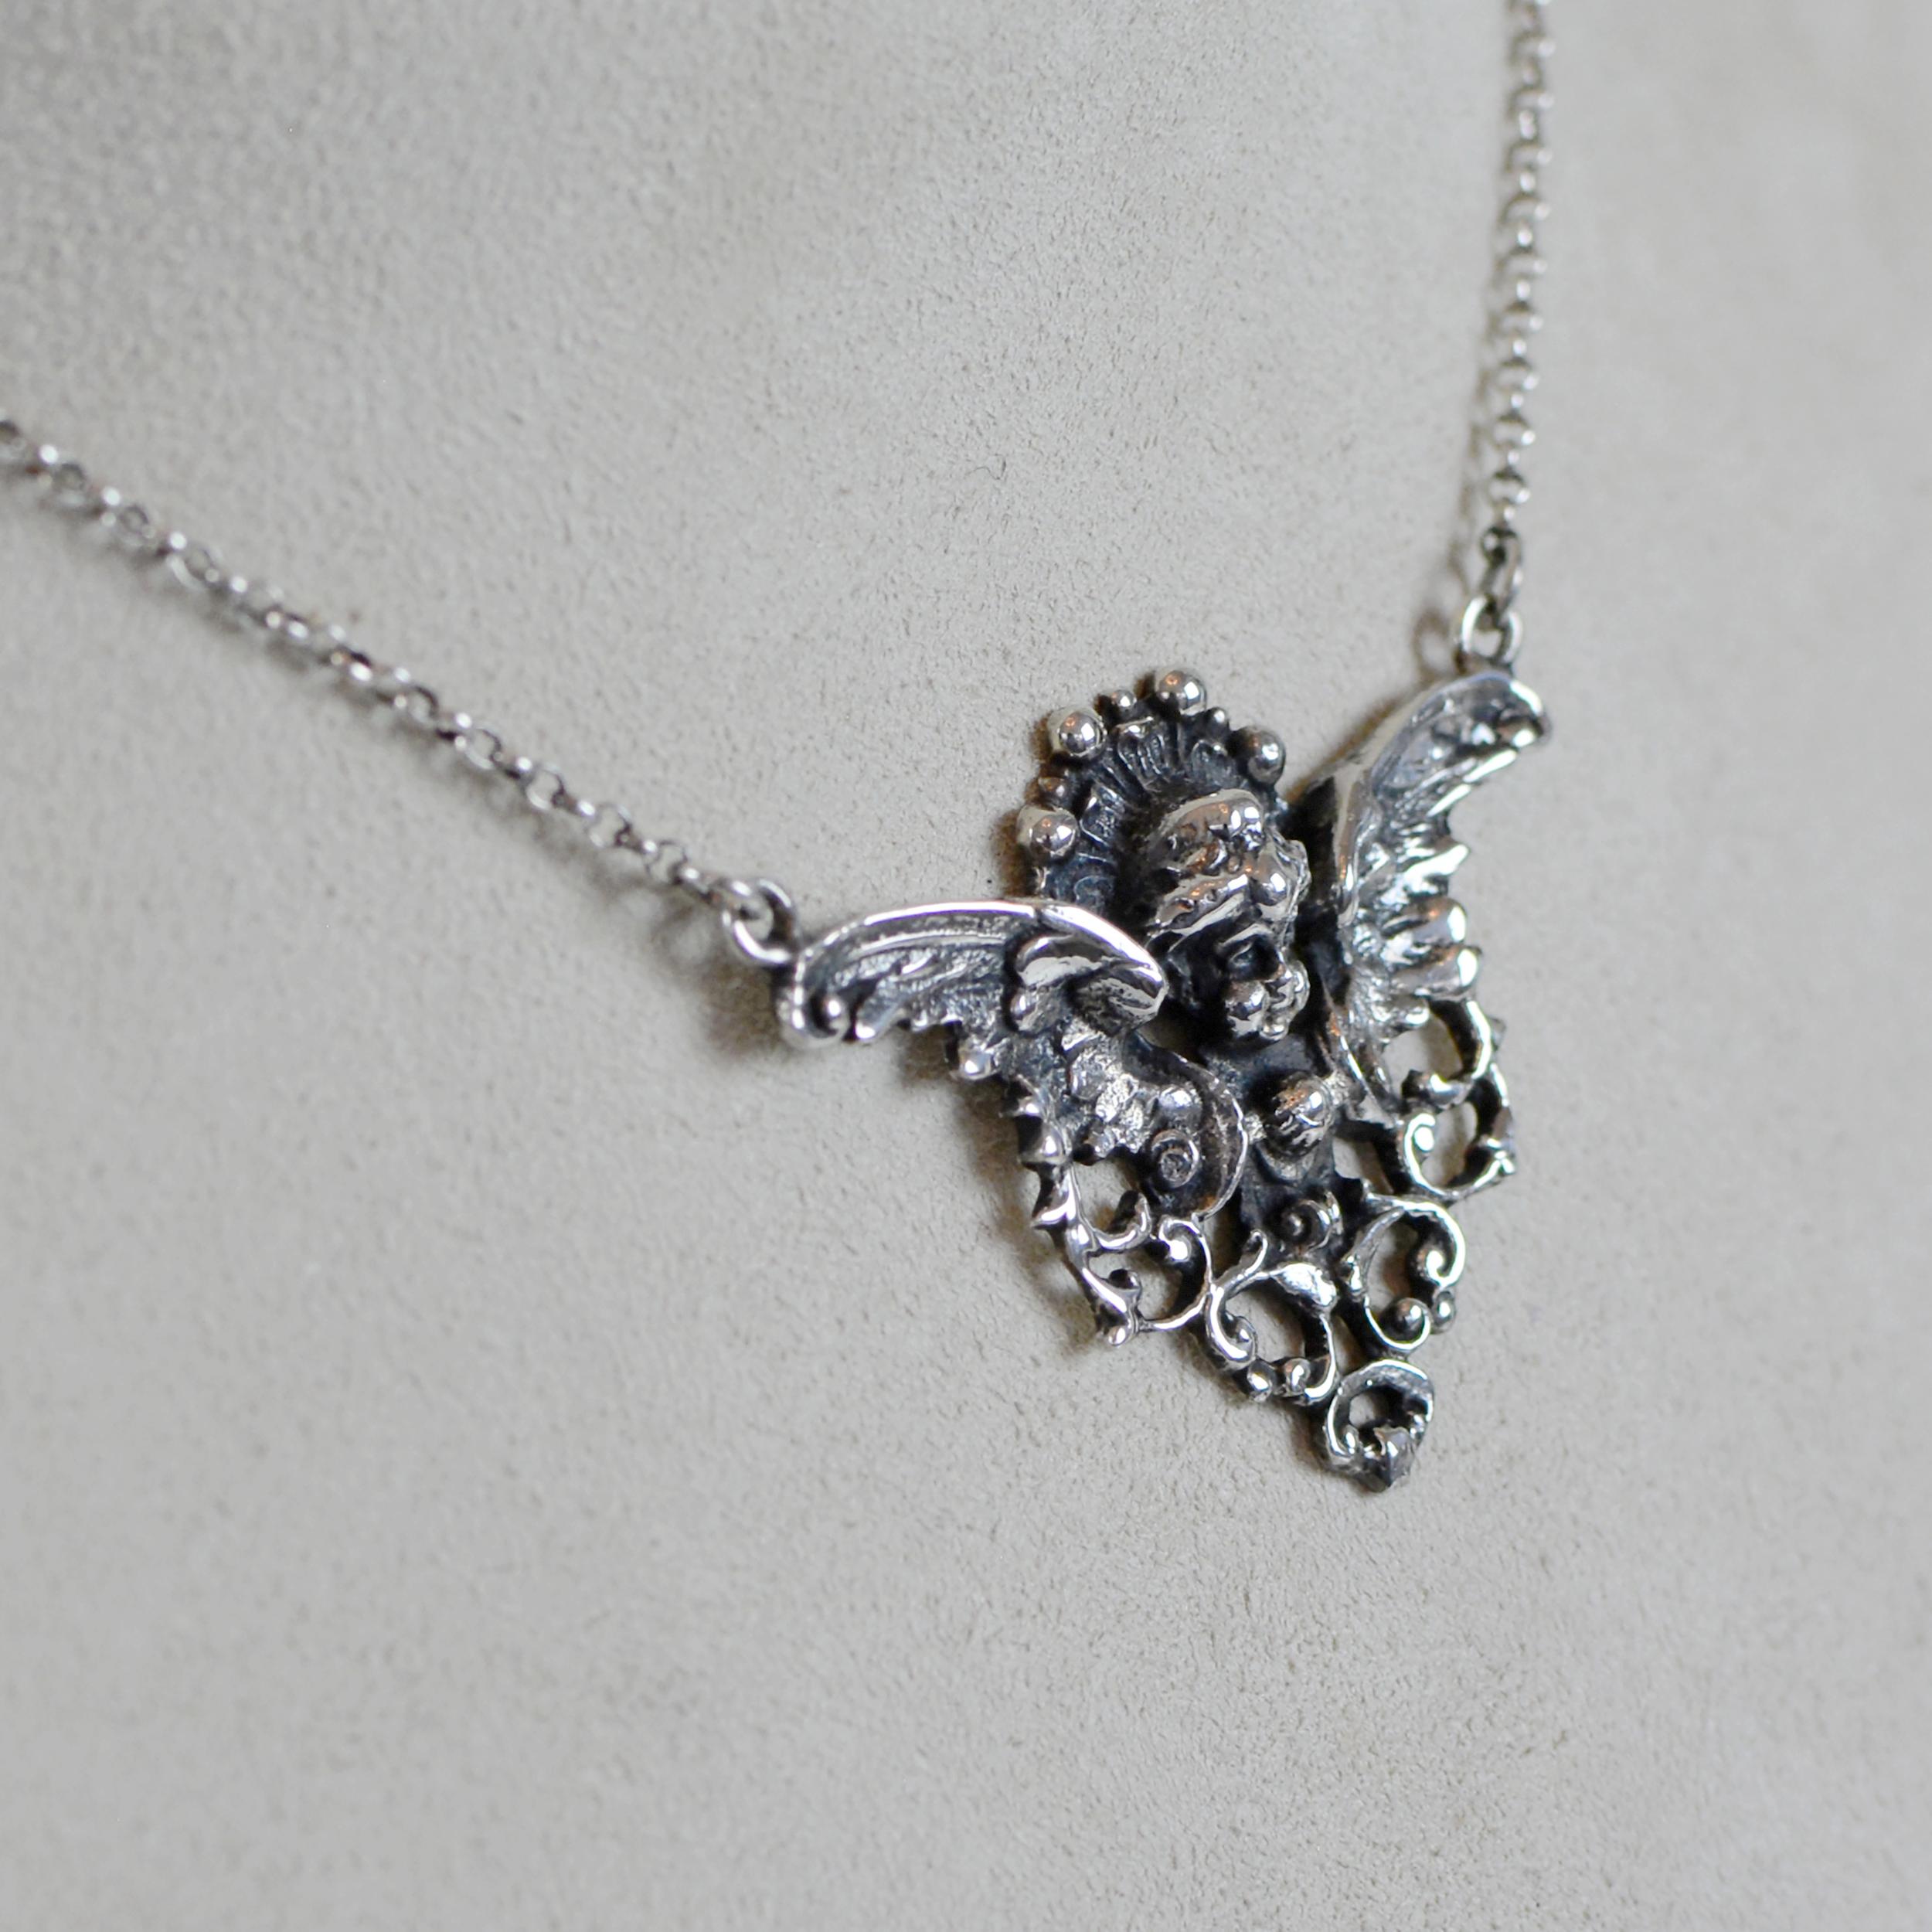 Jill Garber Rococo Winged Archangel Michael Pendant Necklace in Sterling Silver For Sale 4